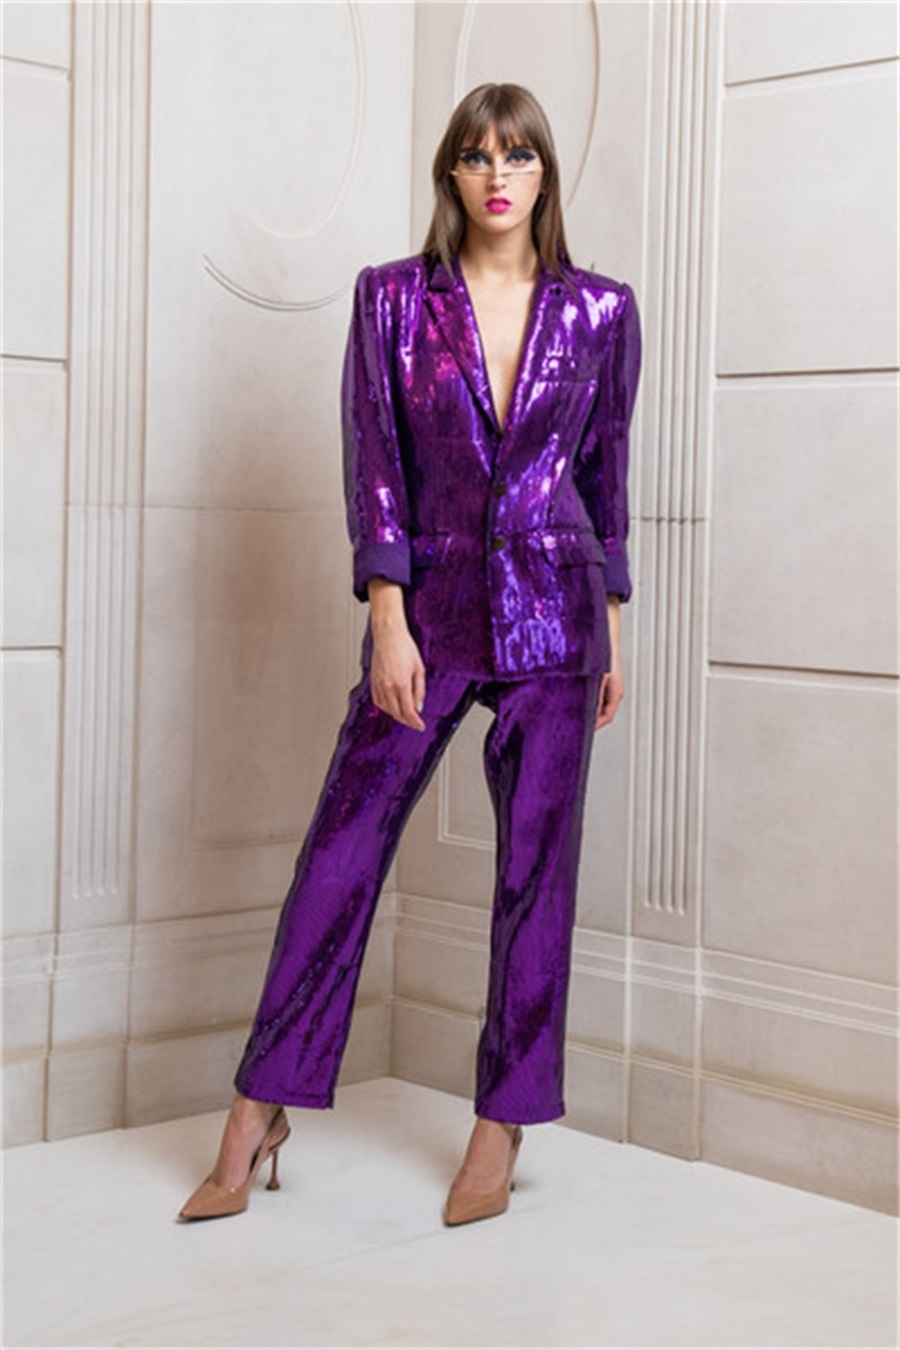 Glitter Sequins Women Pants Suits Sets Elegant Sexy Single Breasted Formal Prom Evening Custom Made Outfits